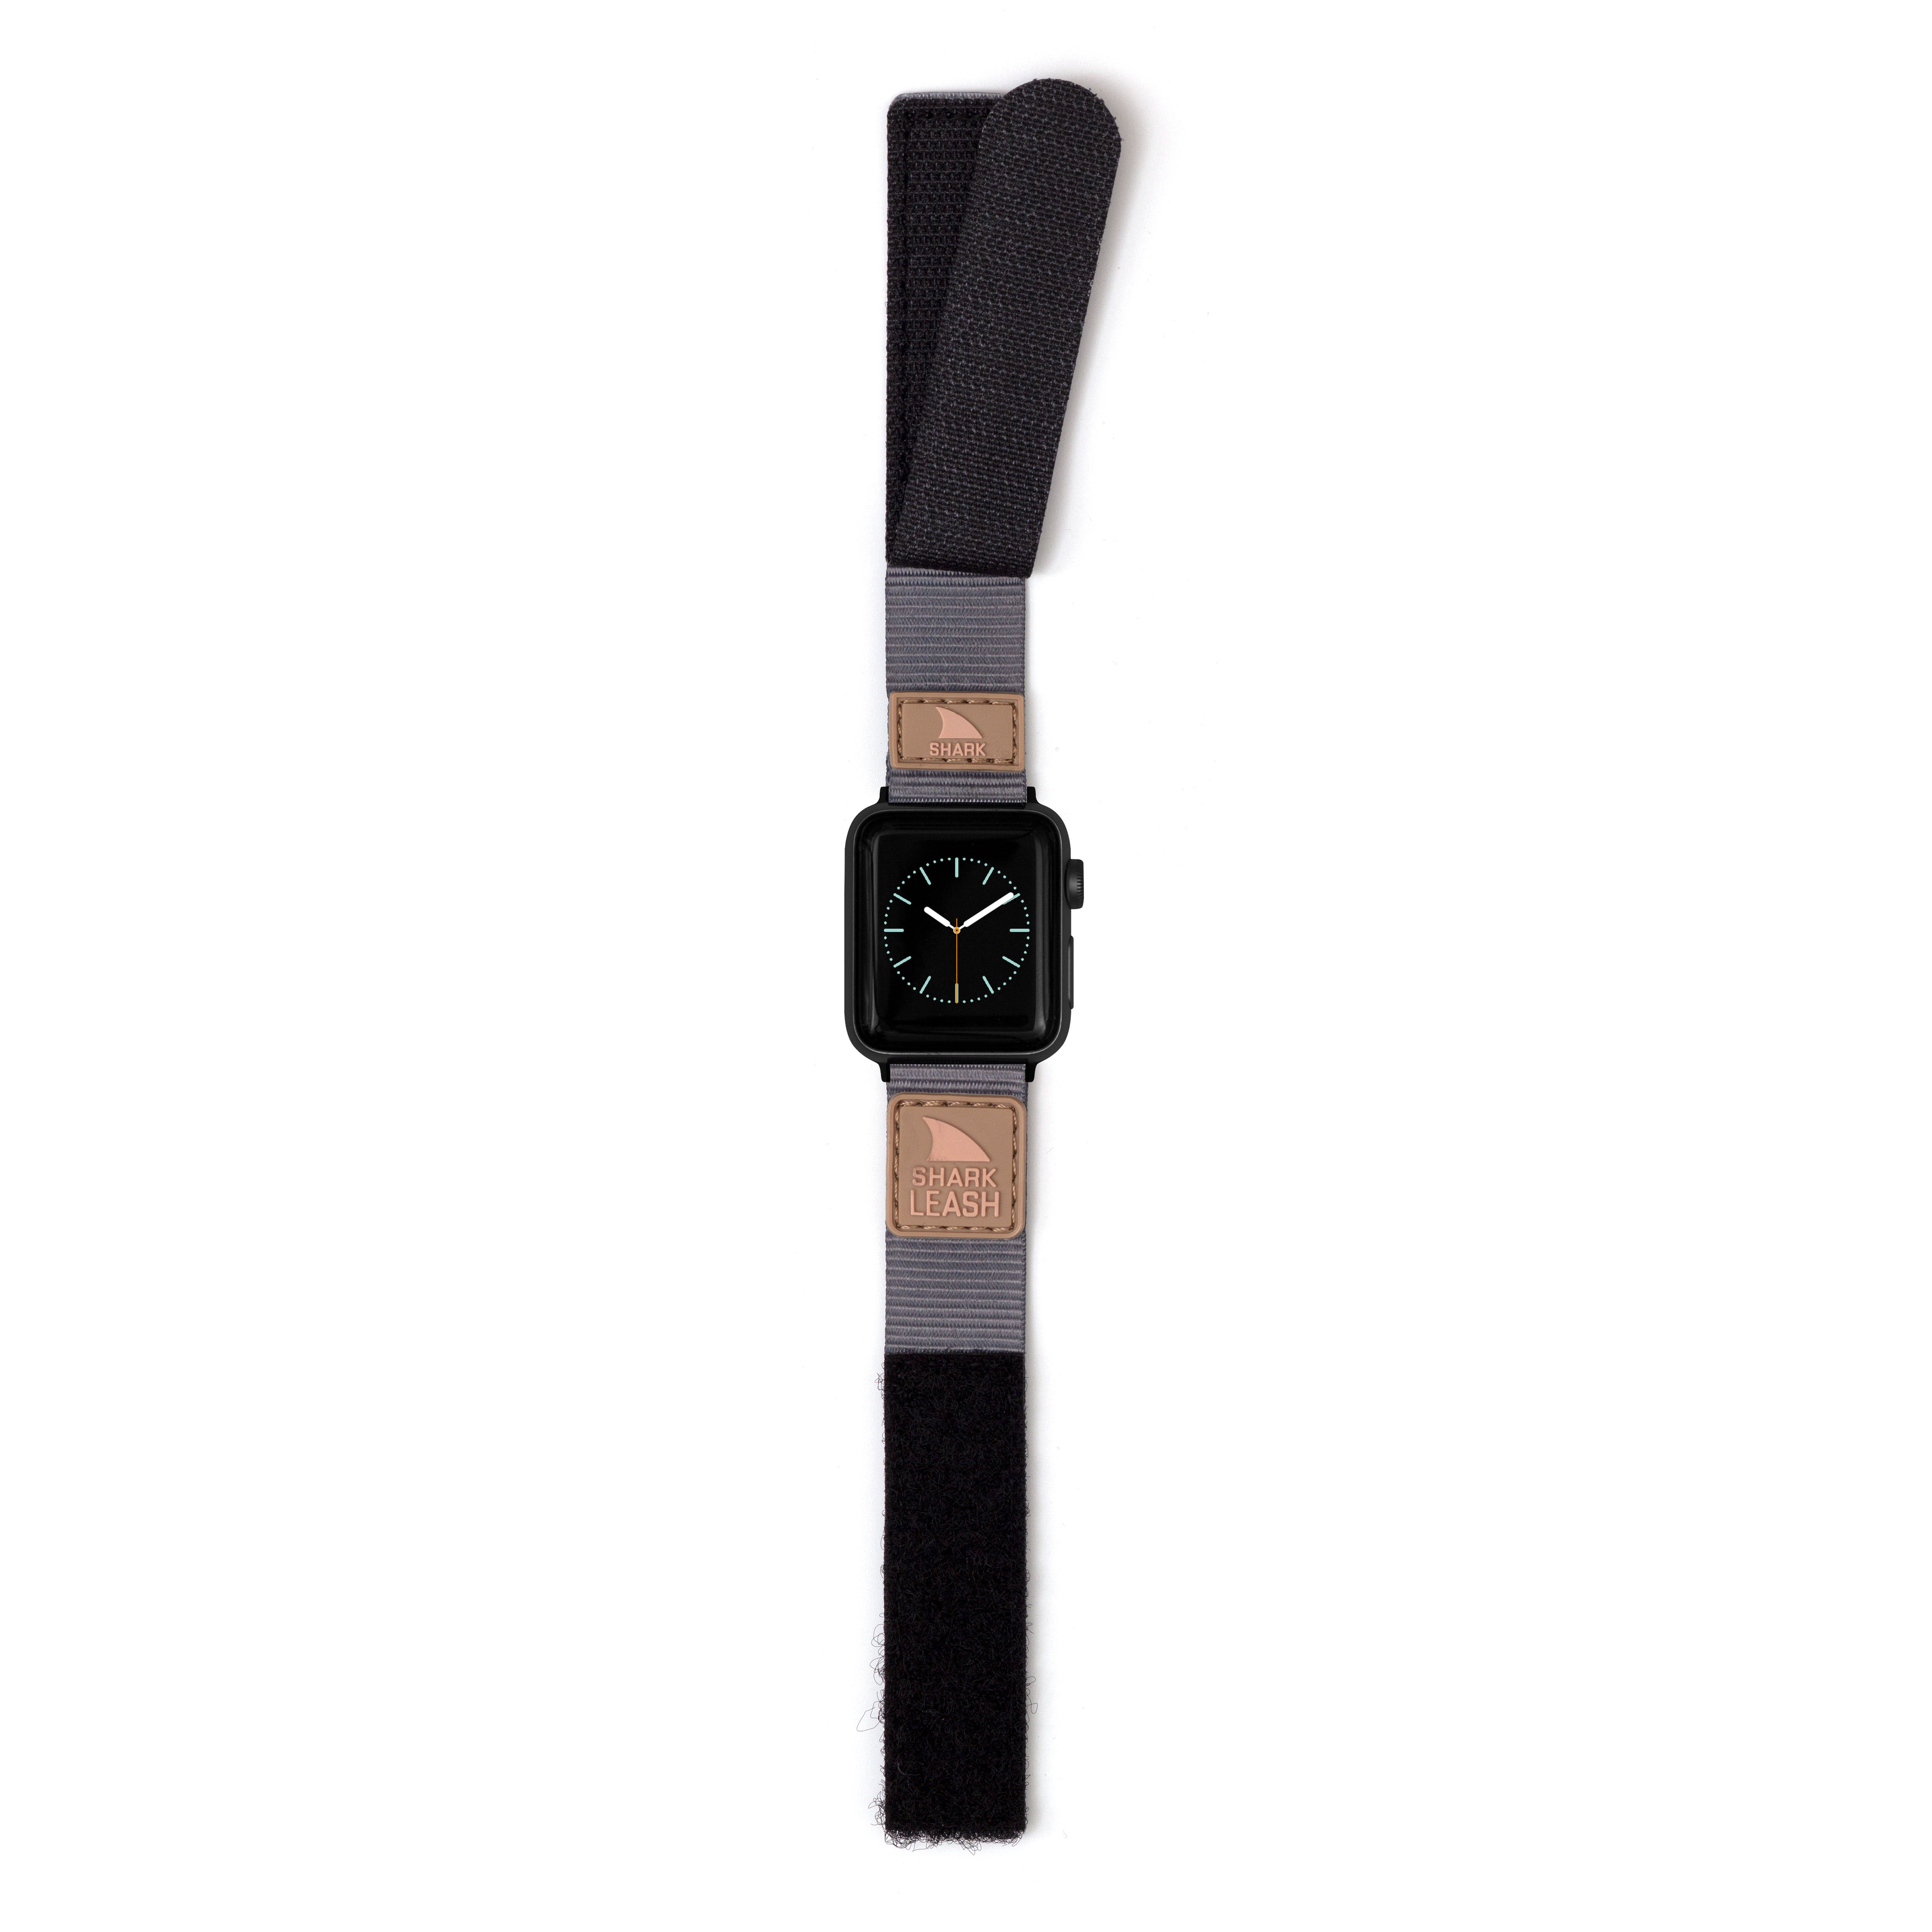 40 mm apple watch band for men lv